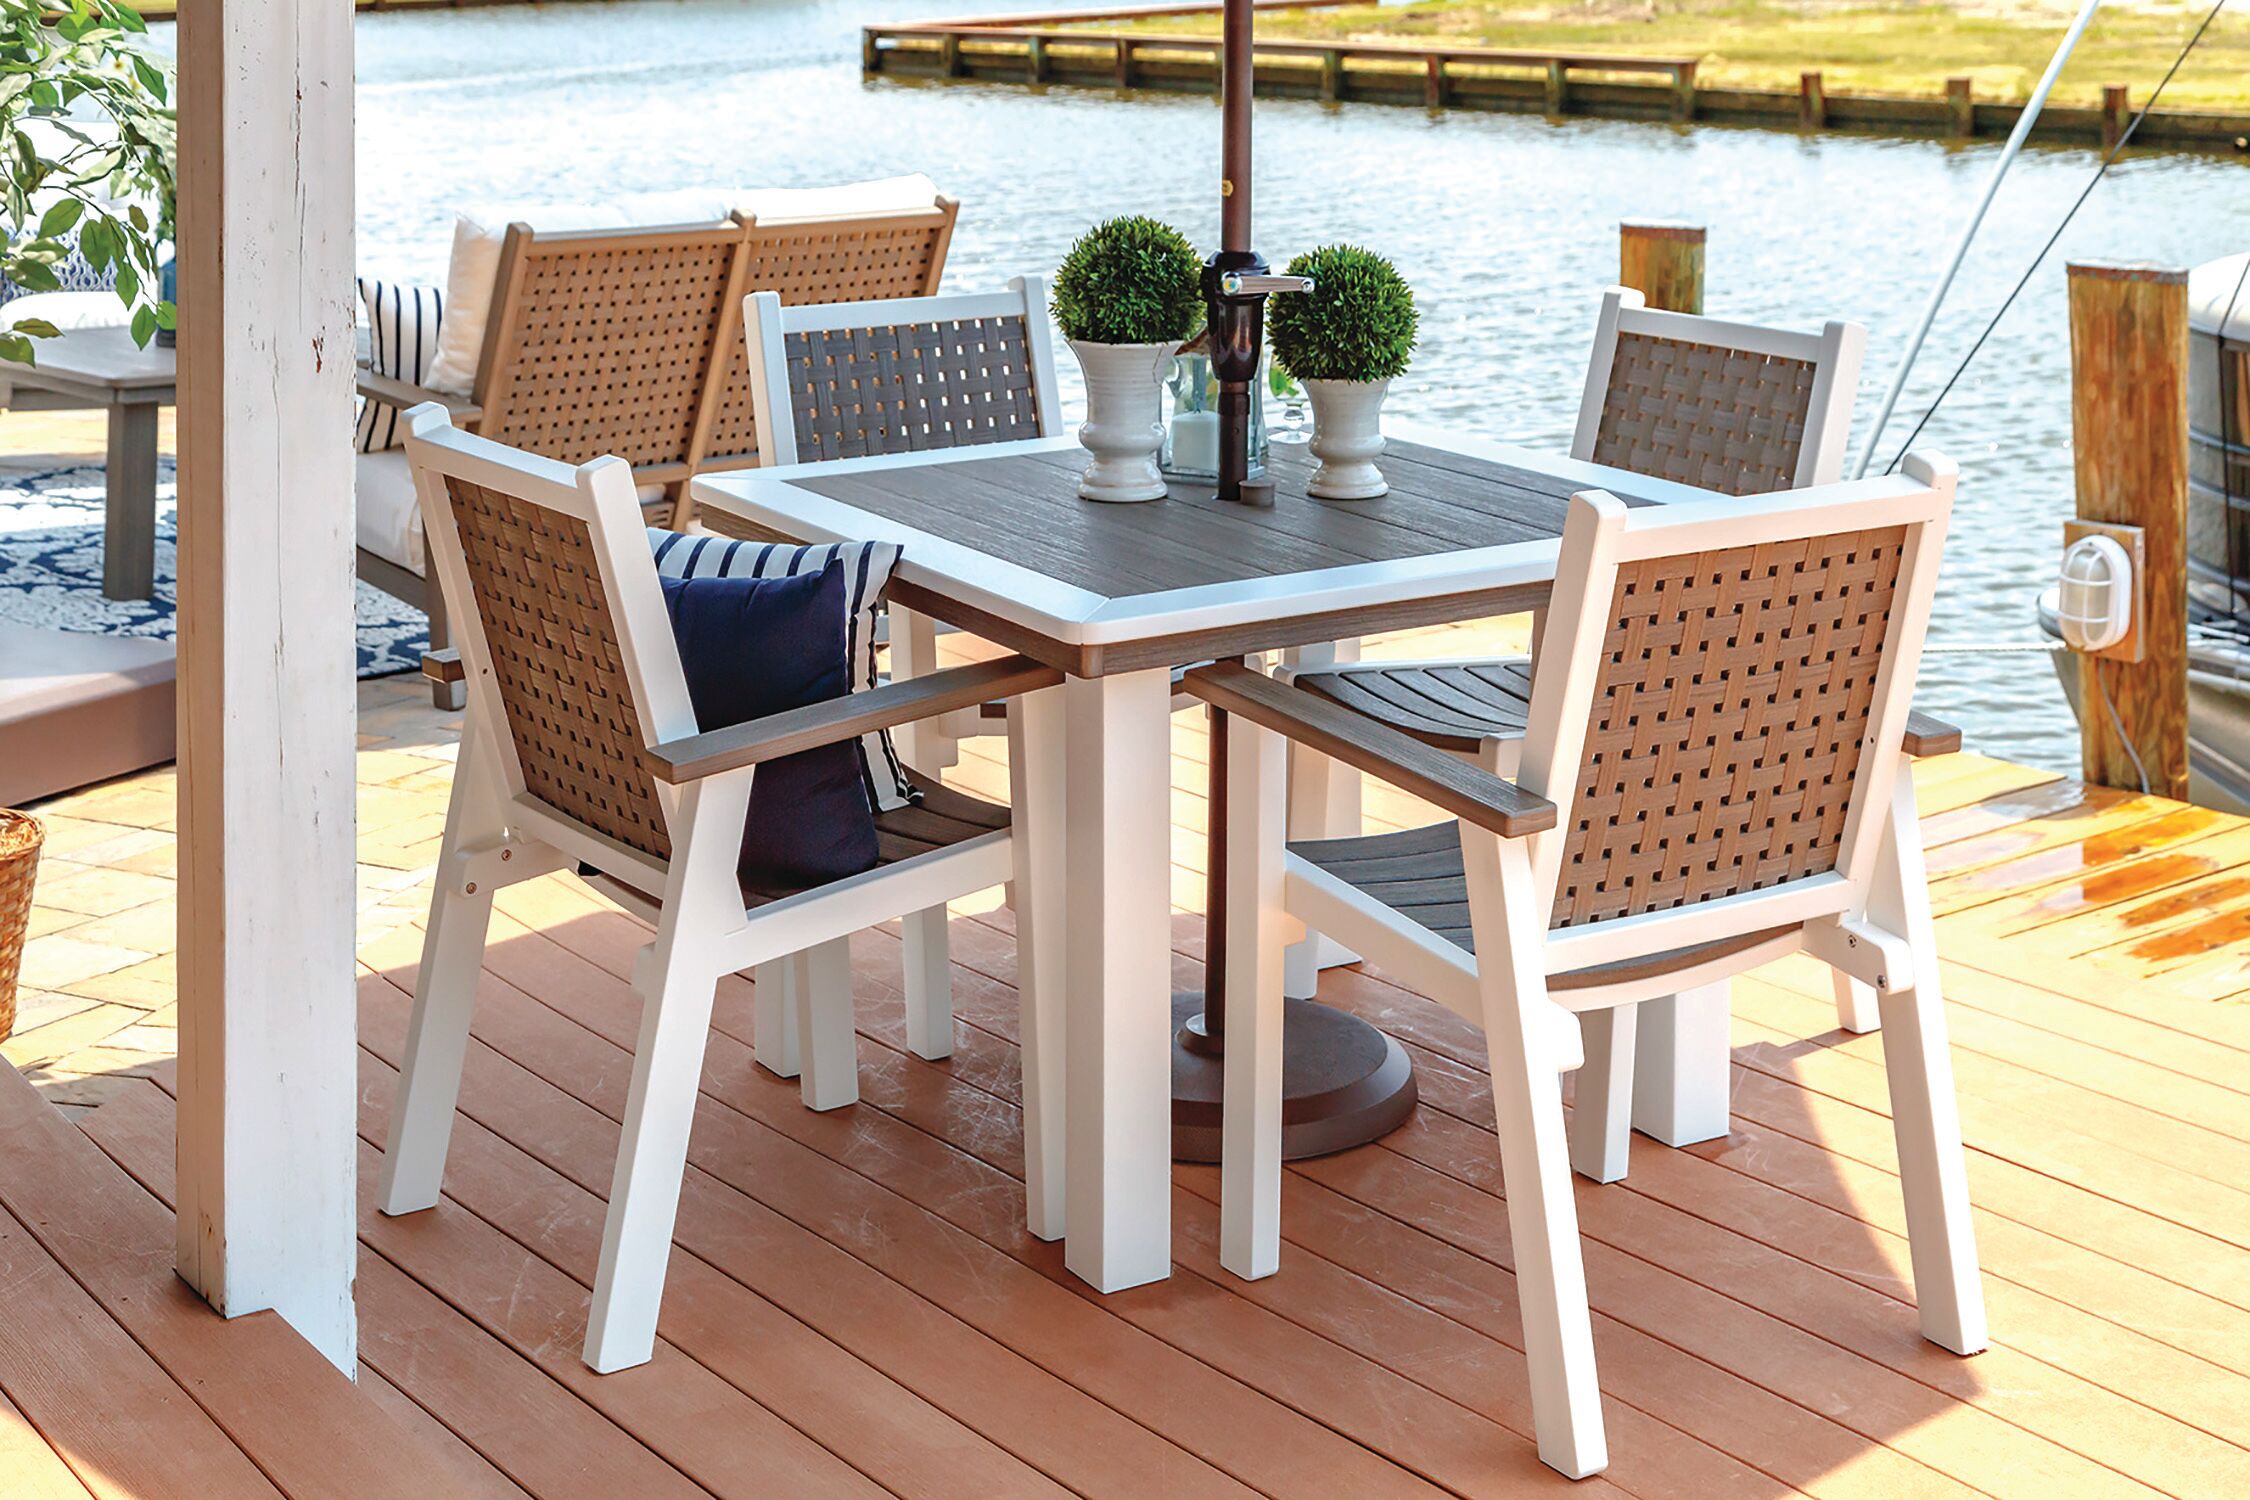 Marina Dining SetThe Comfort Craft Marina Dining Set chairs have woven fabric backs and durable poly-lumber construction for a lighter profile.